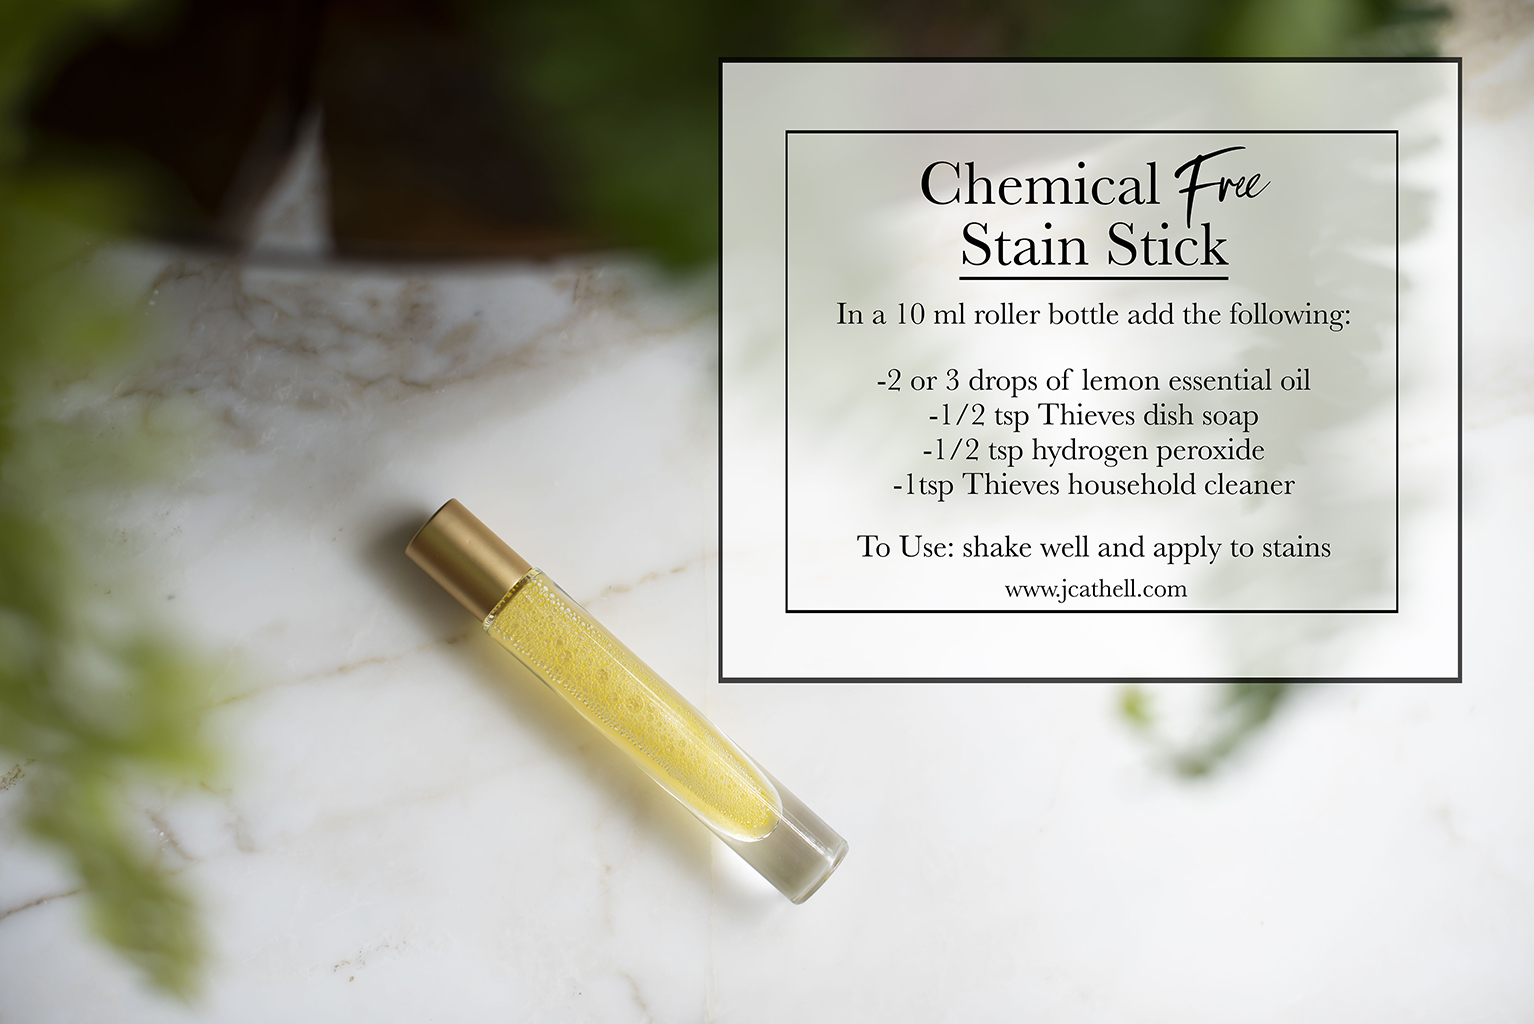 CHEMICAL FREE STAIN STICK